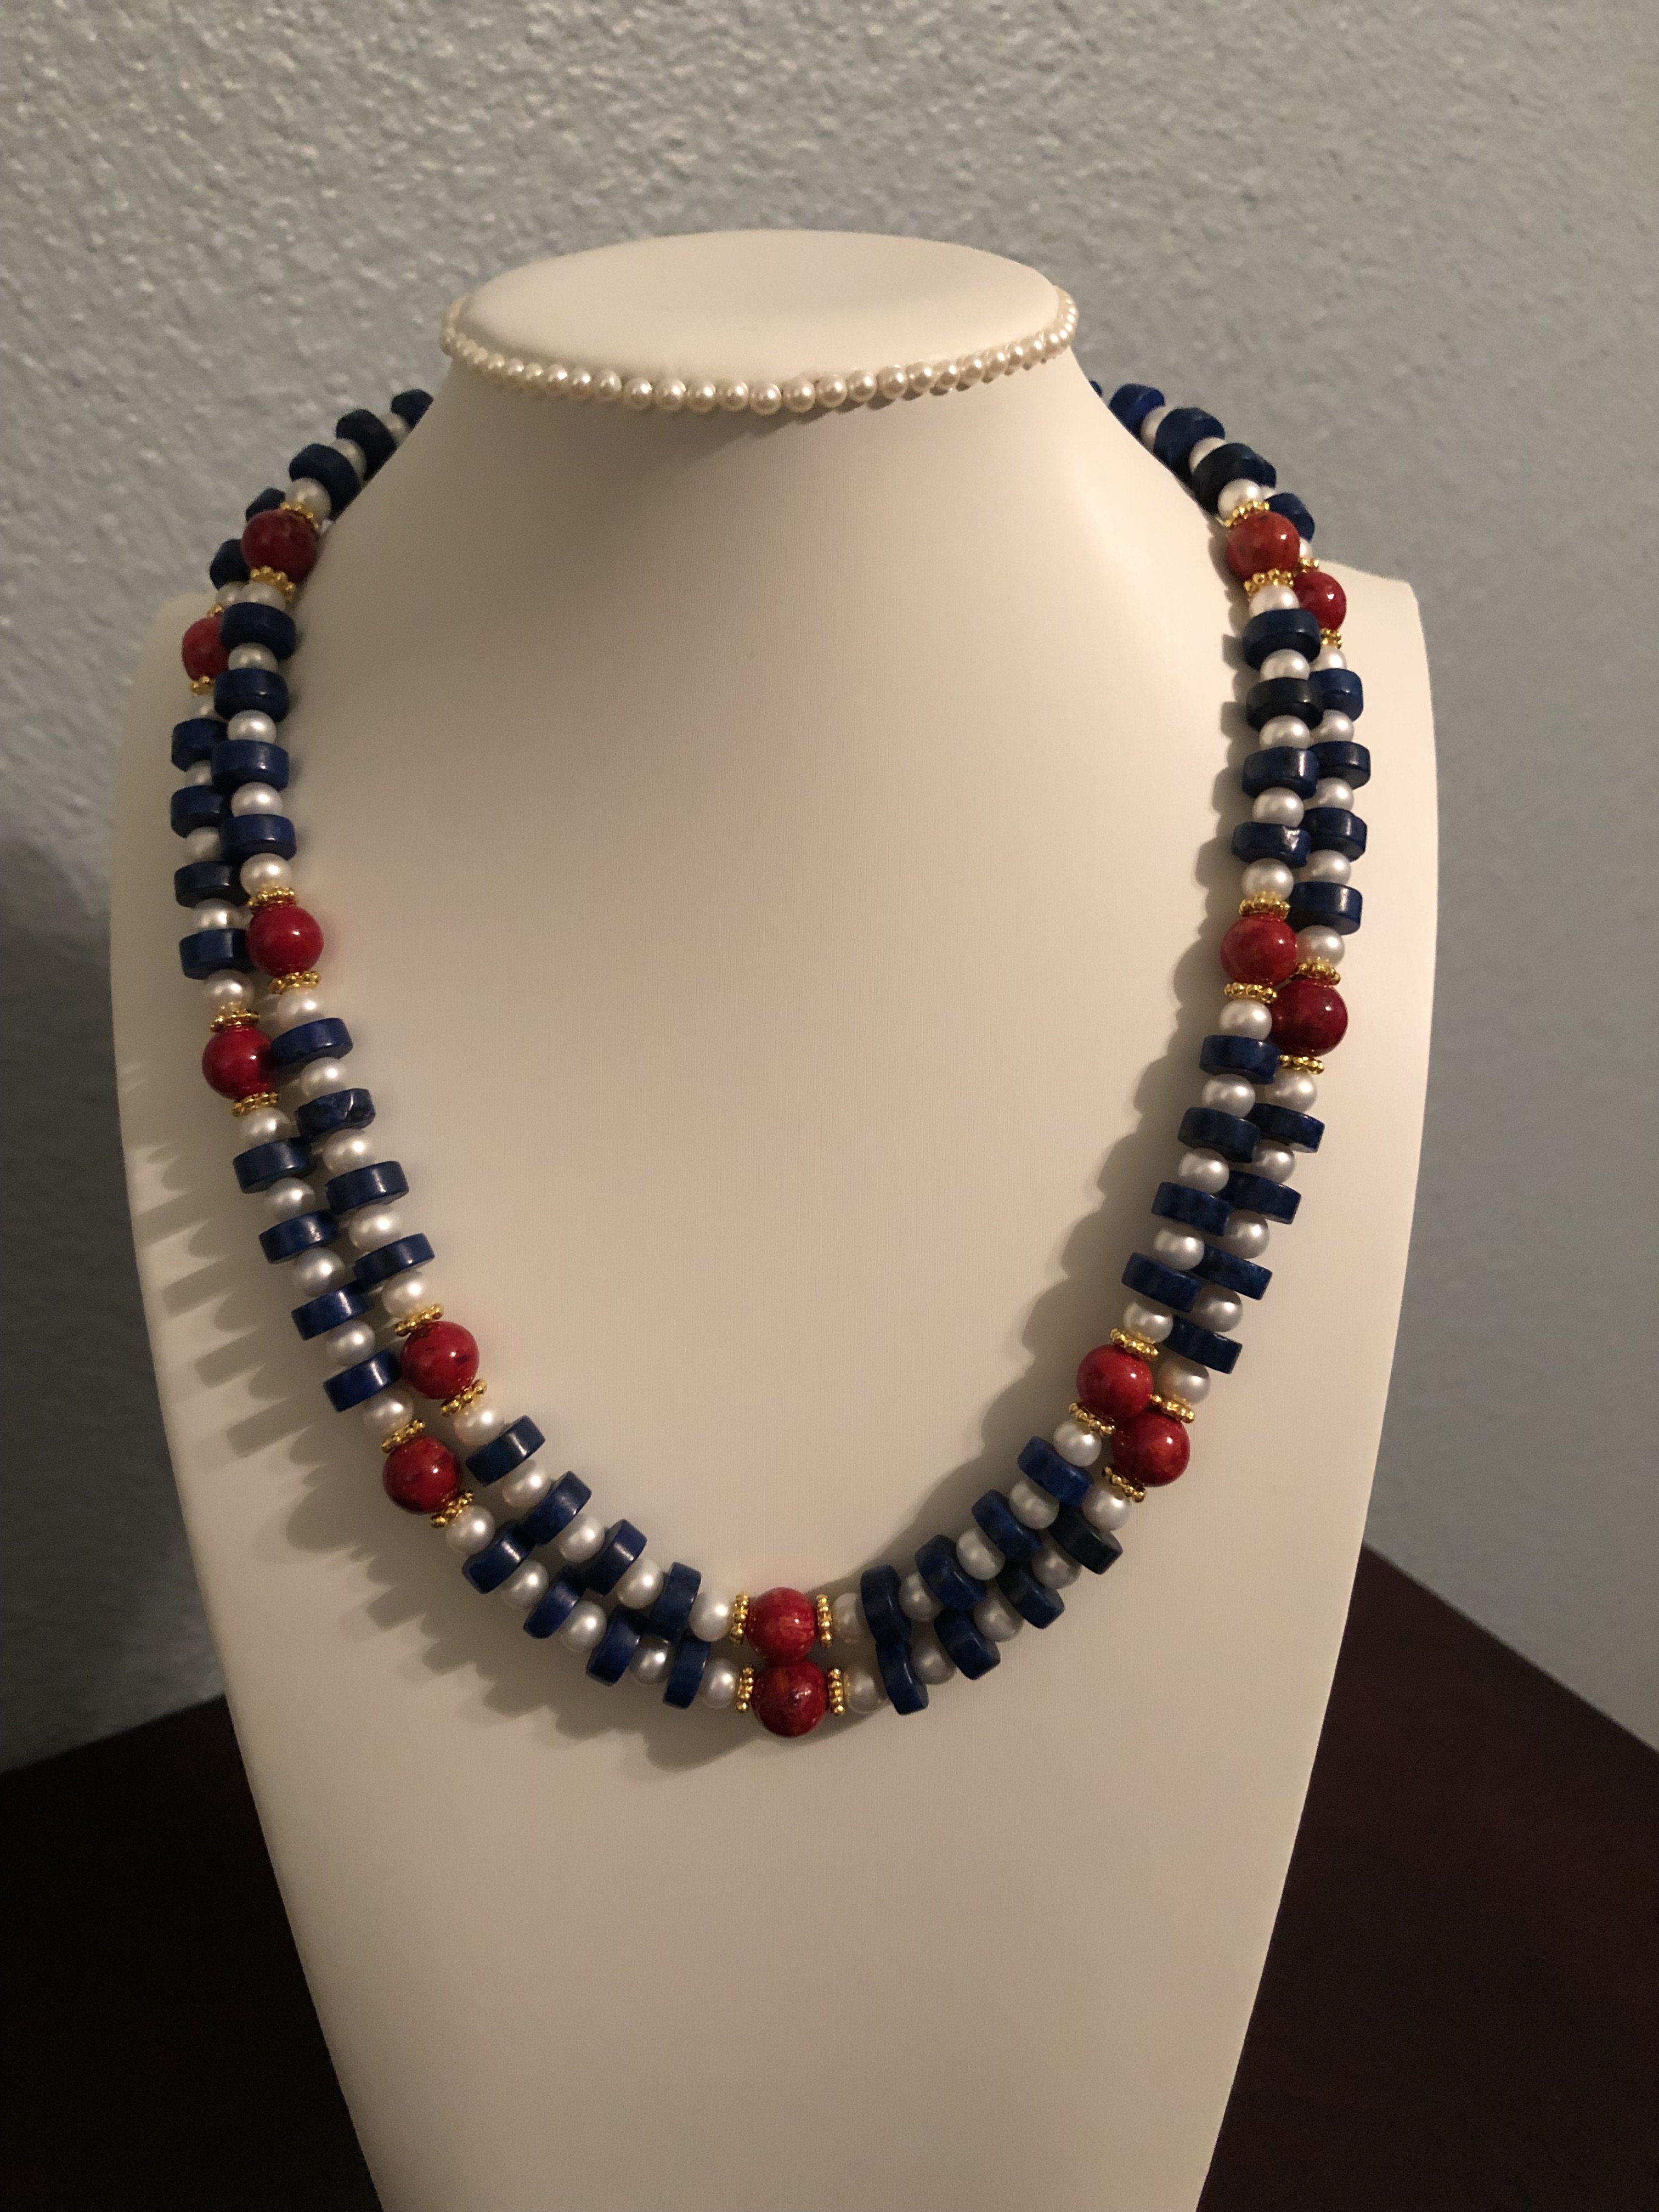 Festive 4th of July necklace with red white and blue